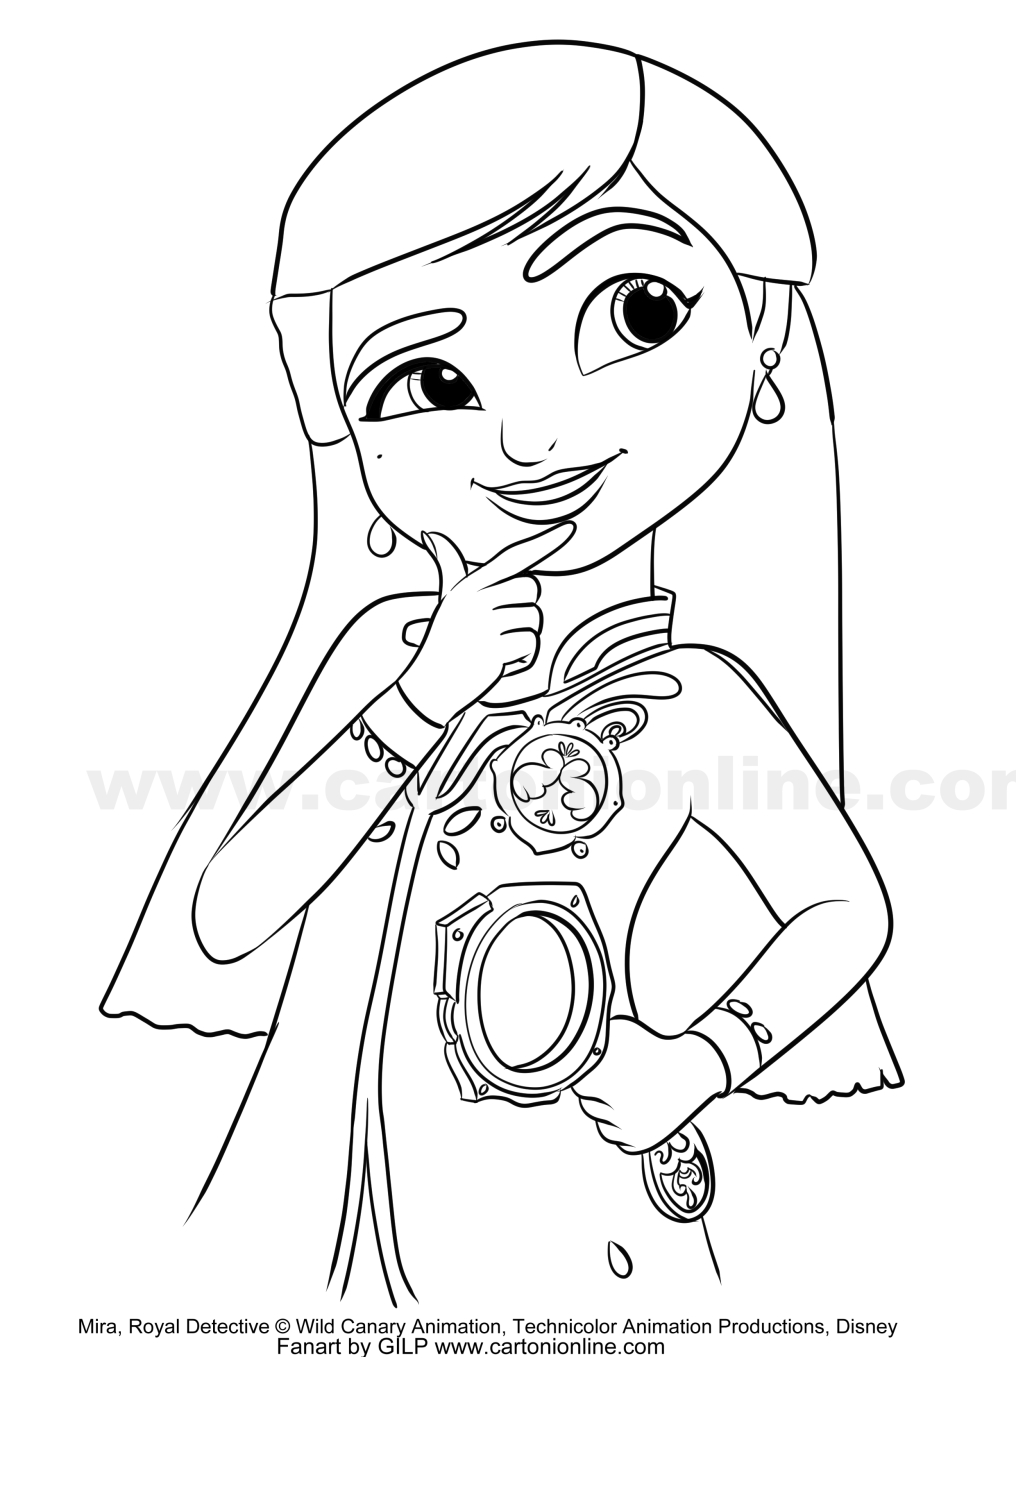 Mira from Mira, Royal Detective coloring pages to print and coloring